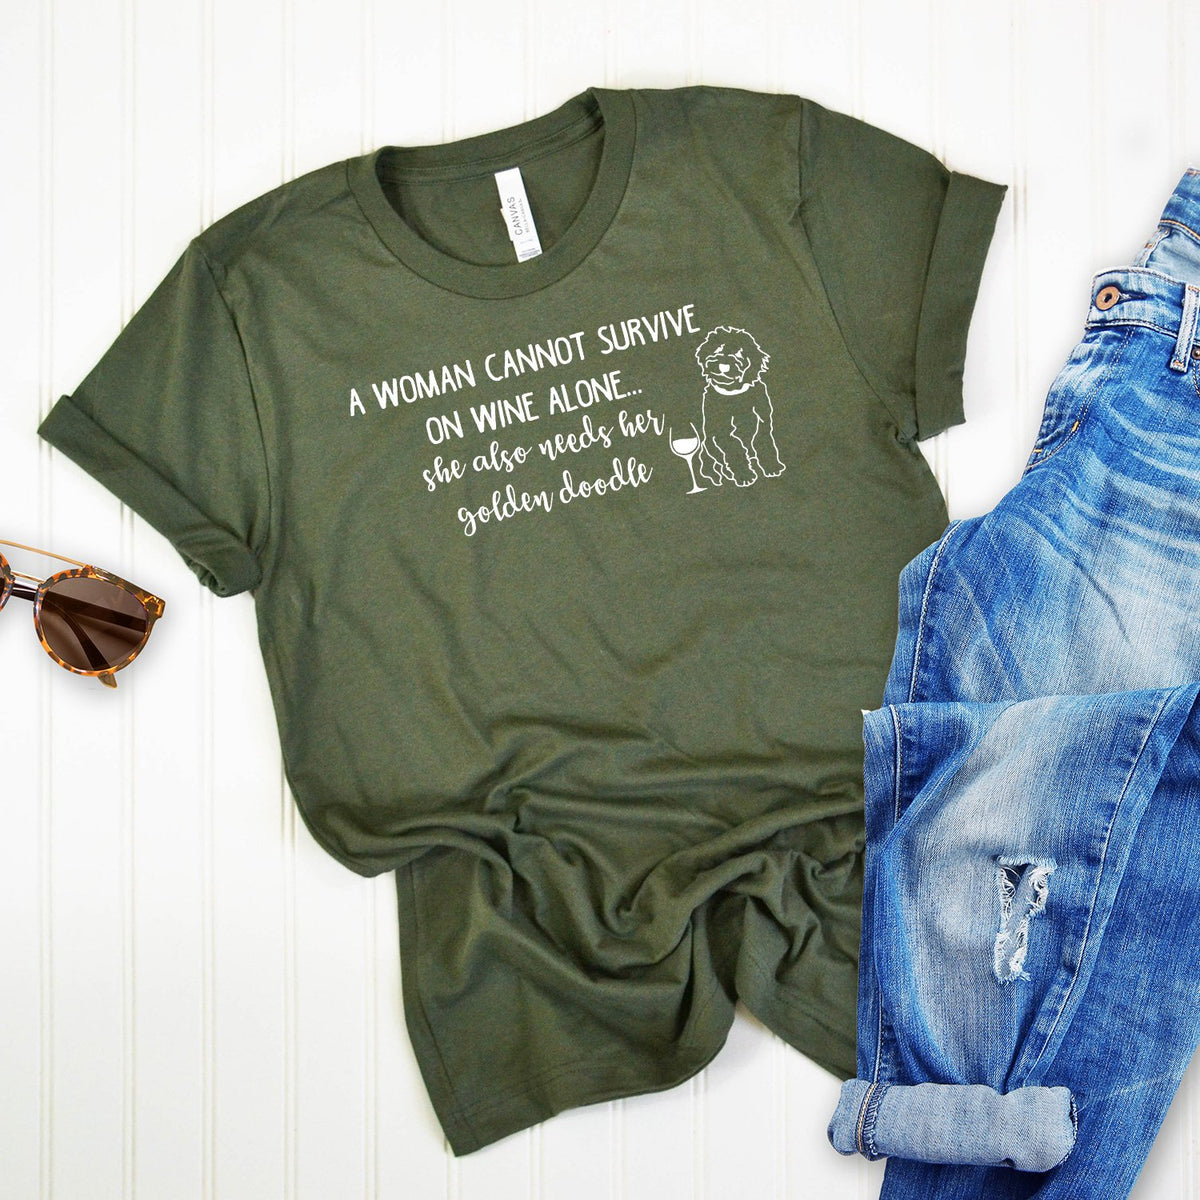 A Woman Cannot Survive on Wine Alone, She also Needs her Golden Doodle - Short Sleeve Tee Shirt